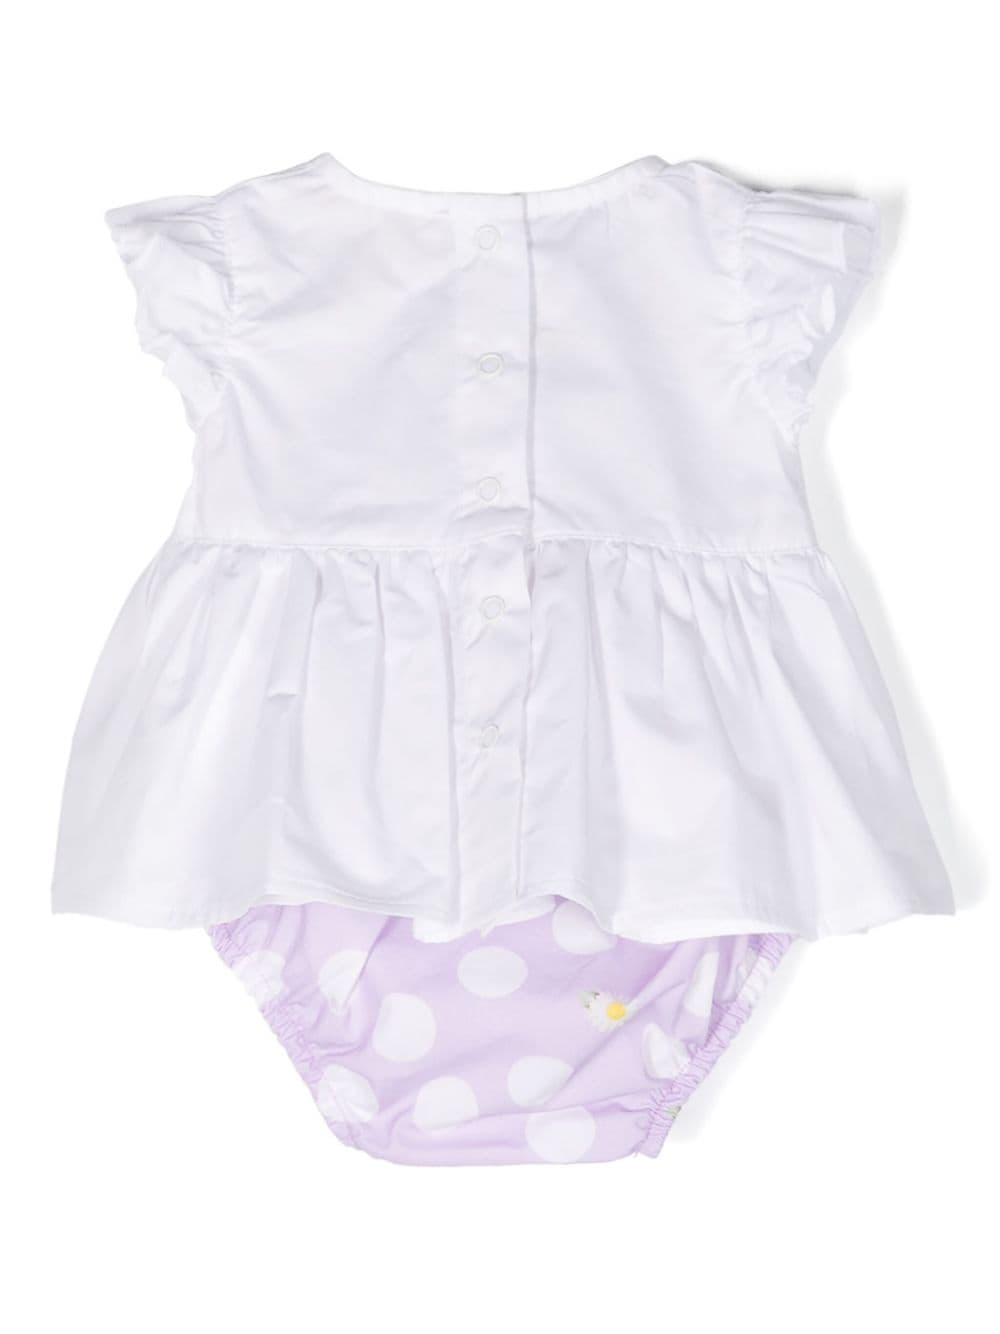 White/lilac baby girl outfit